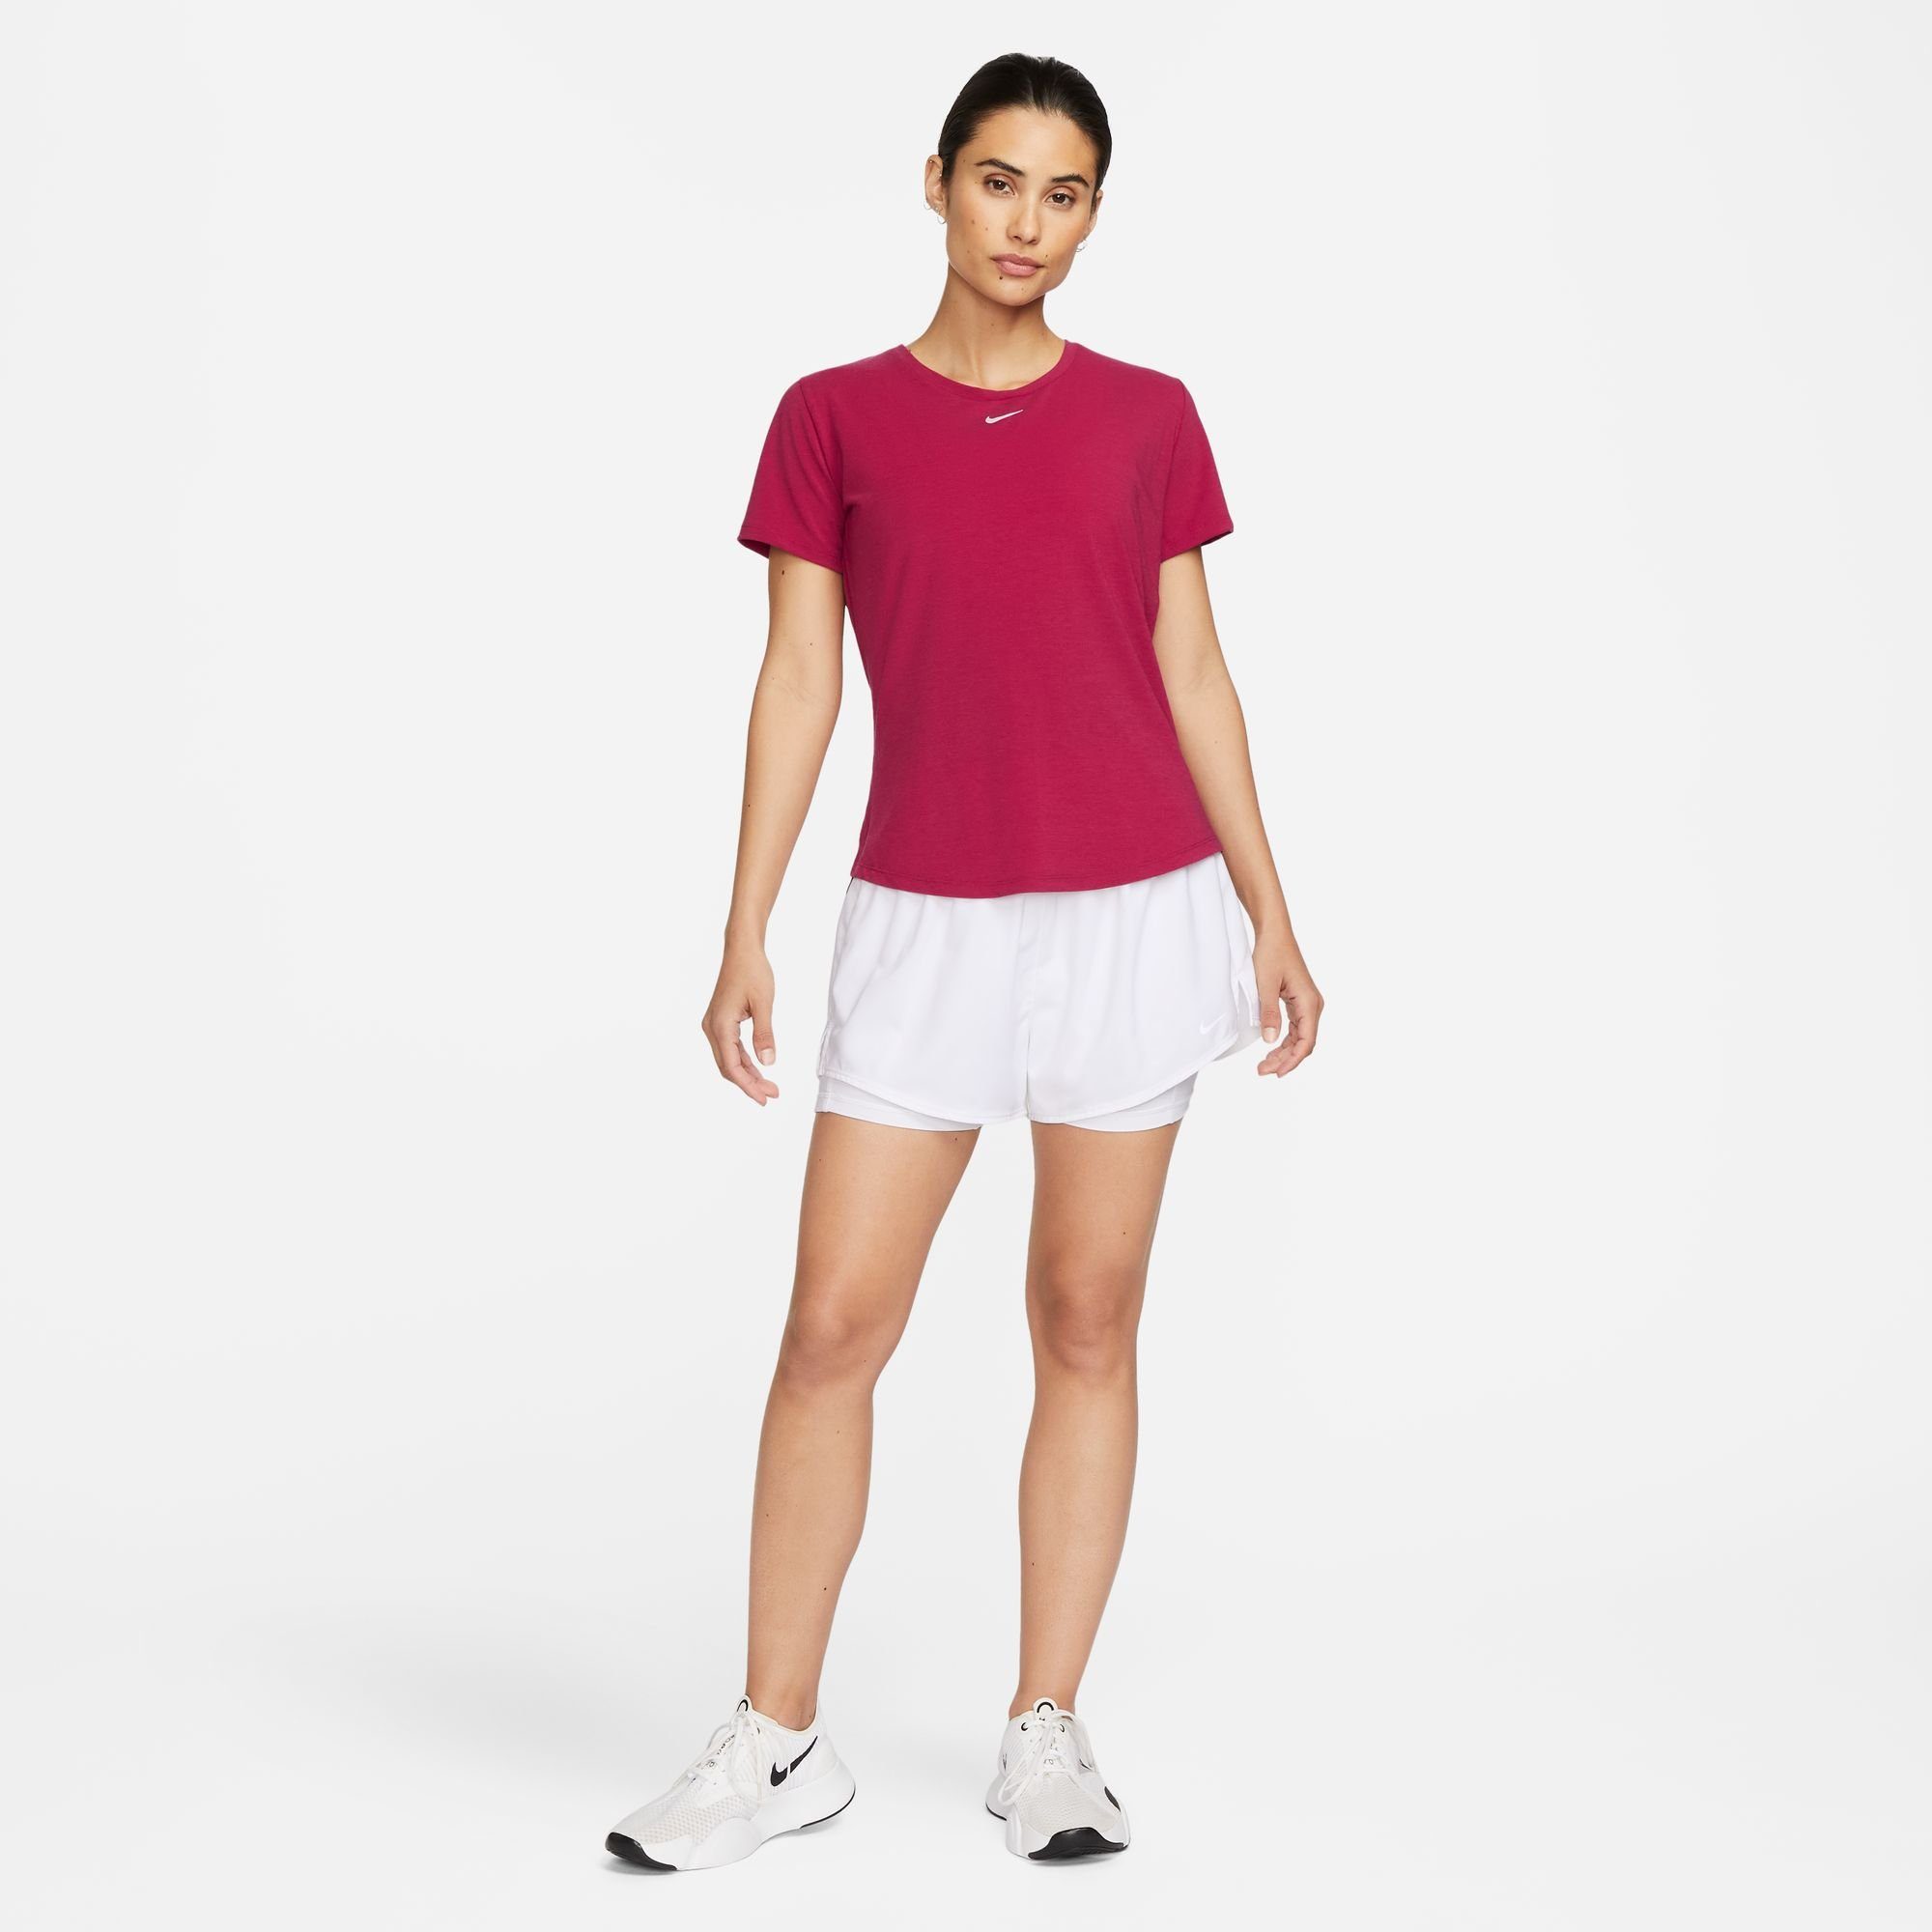 SILV Nike FIT LUXE Trainingsshirt STANDARD SHORT-SLEEVE UV WOMEN'S ONE NOBLE RED/REFLECTIVE DRI-FIT TOP